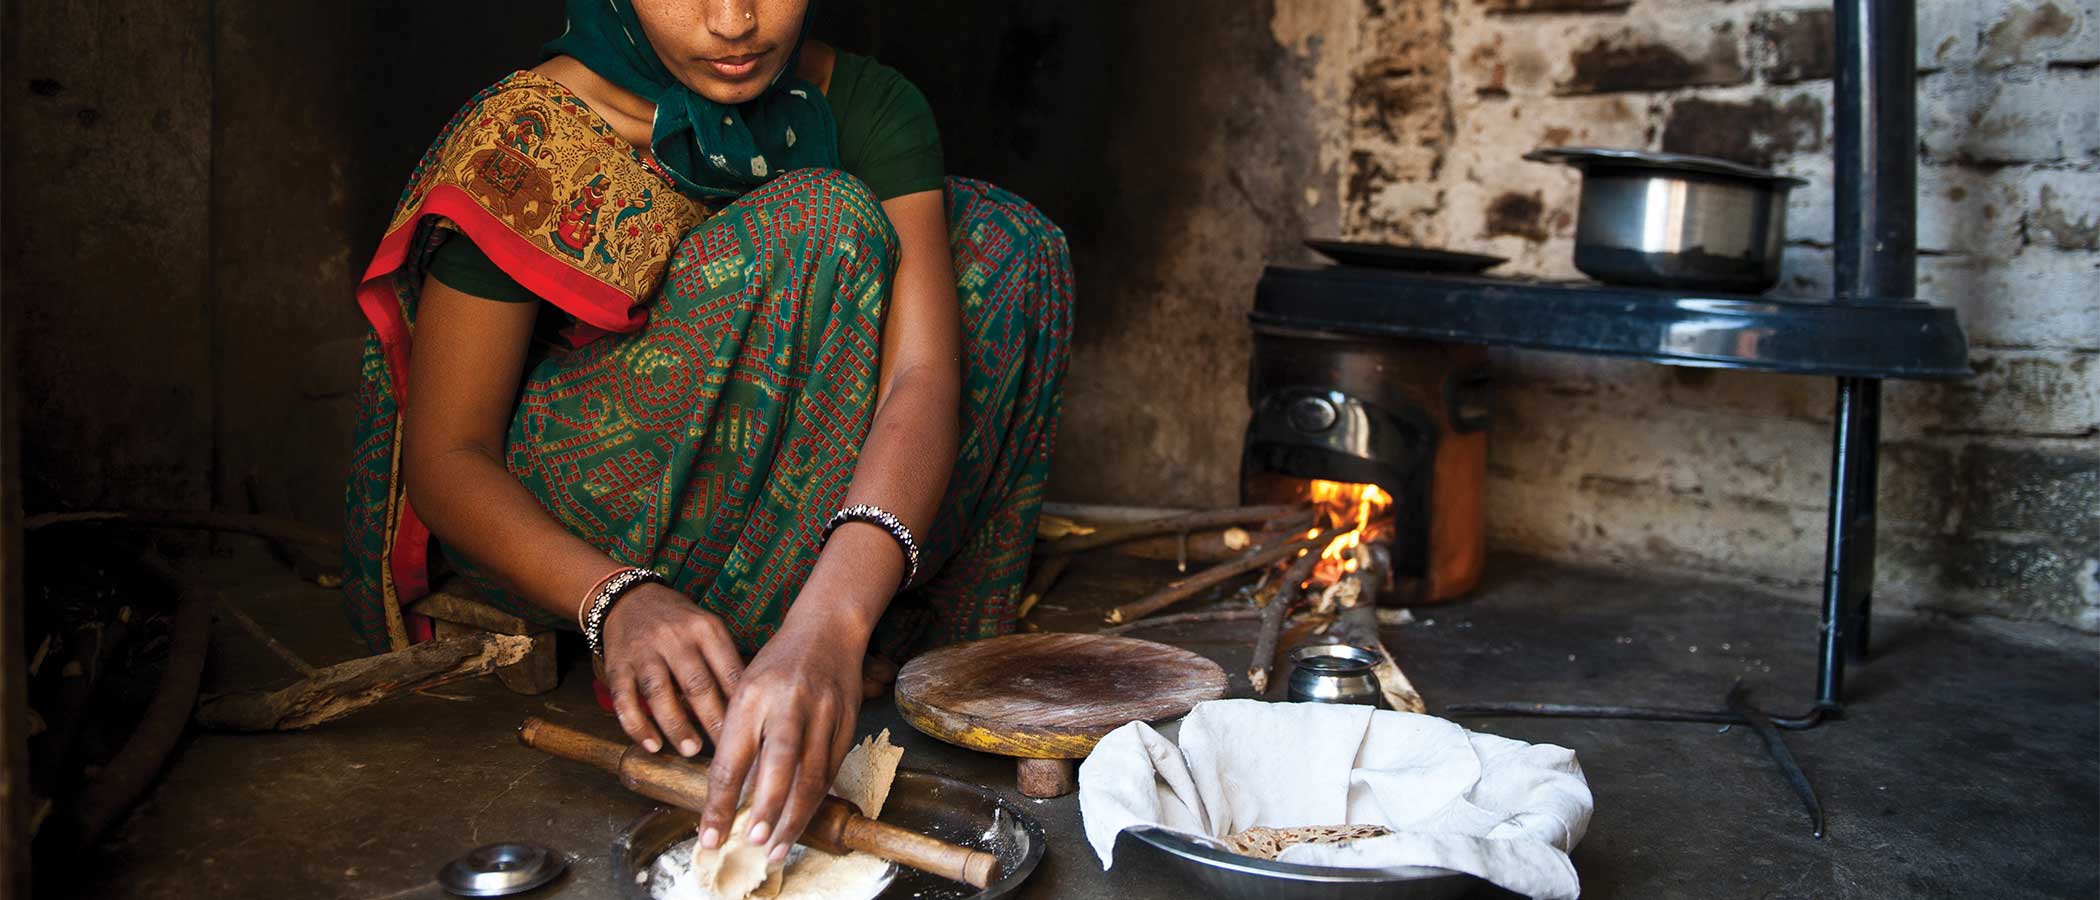 A woman prepares food on an improved cookstove in her home in the Indian state of Gujarat.